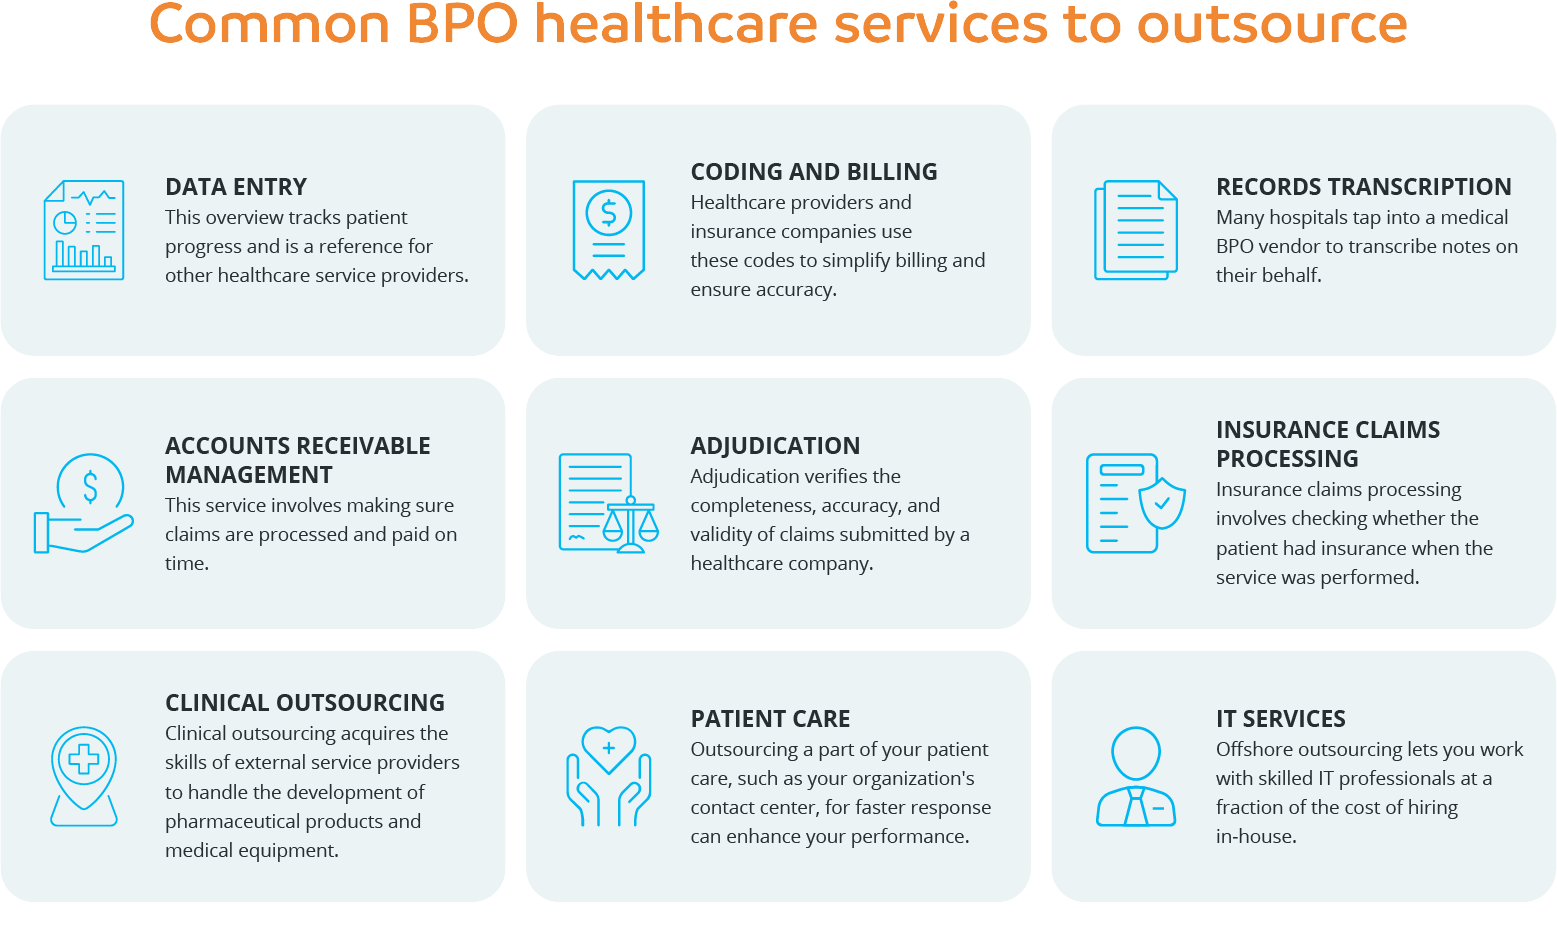 COMMON BPO HEALTHCARE SERVICES TO OUTSOURCE